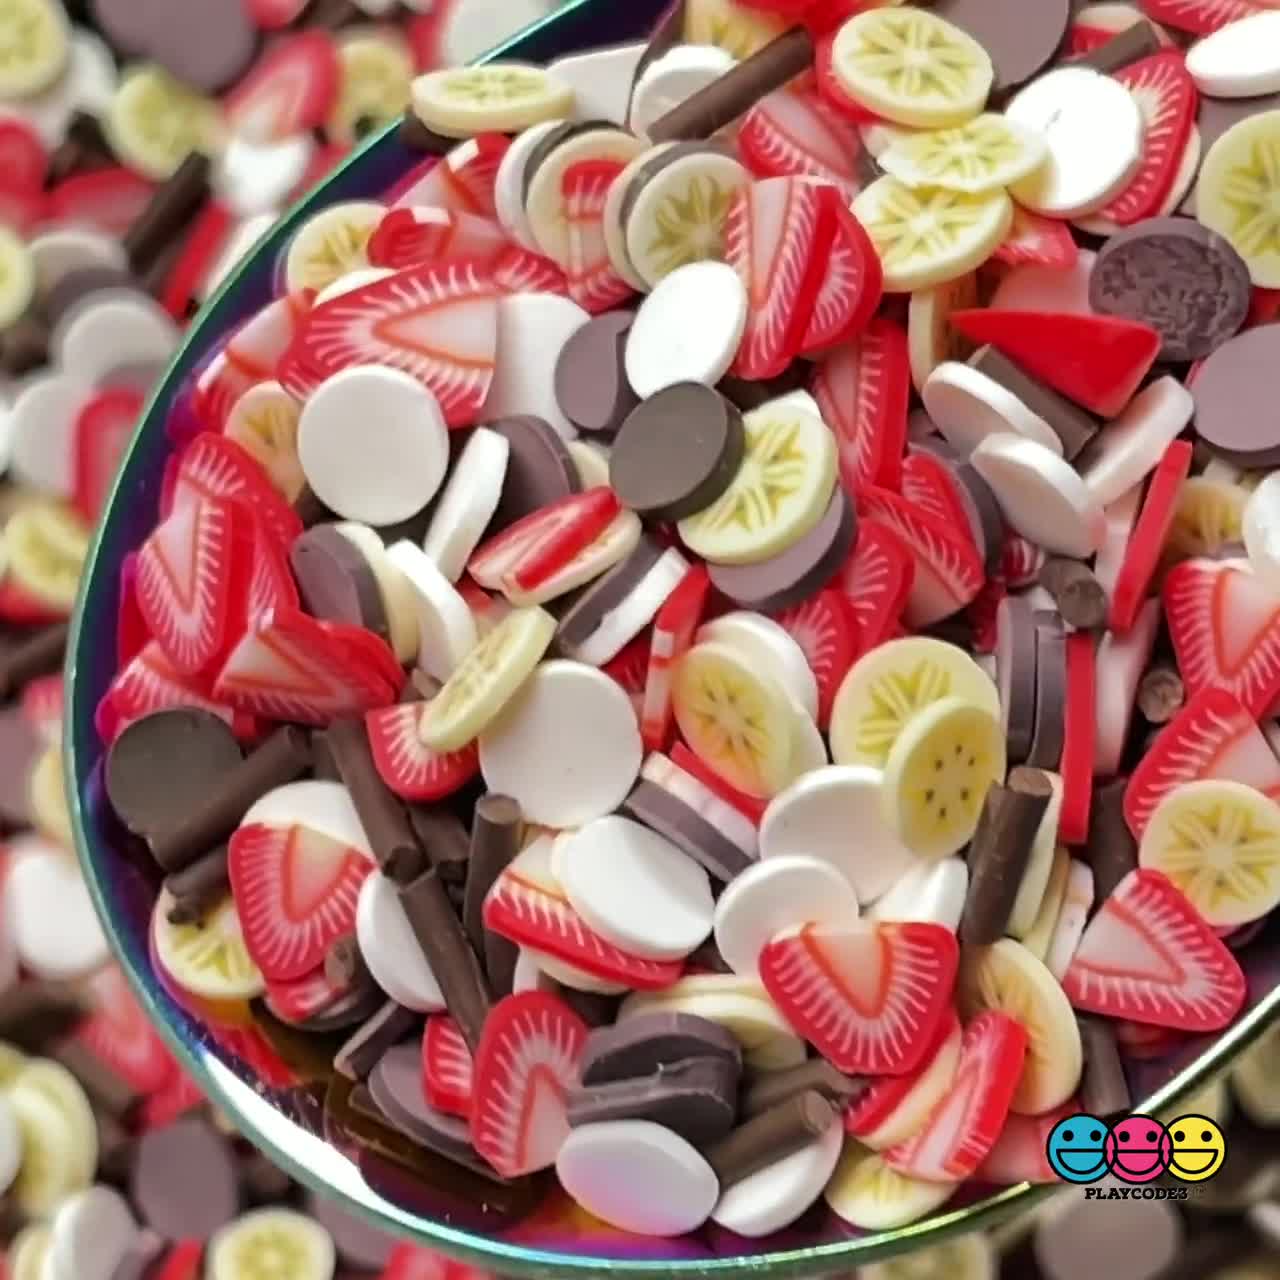 20pcs 12 Colors Candies Fake Candy Charms Flatback Faux Food Realistic  Crafting Supplies Cabochons Fake Bake Slime Supplies MM PLAYCODE3 